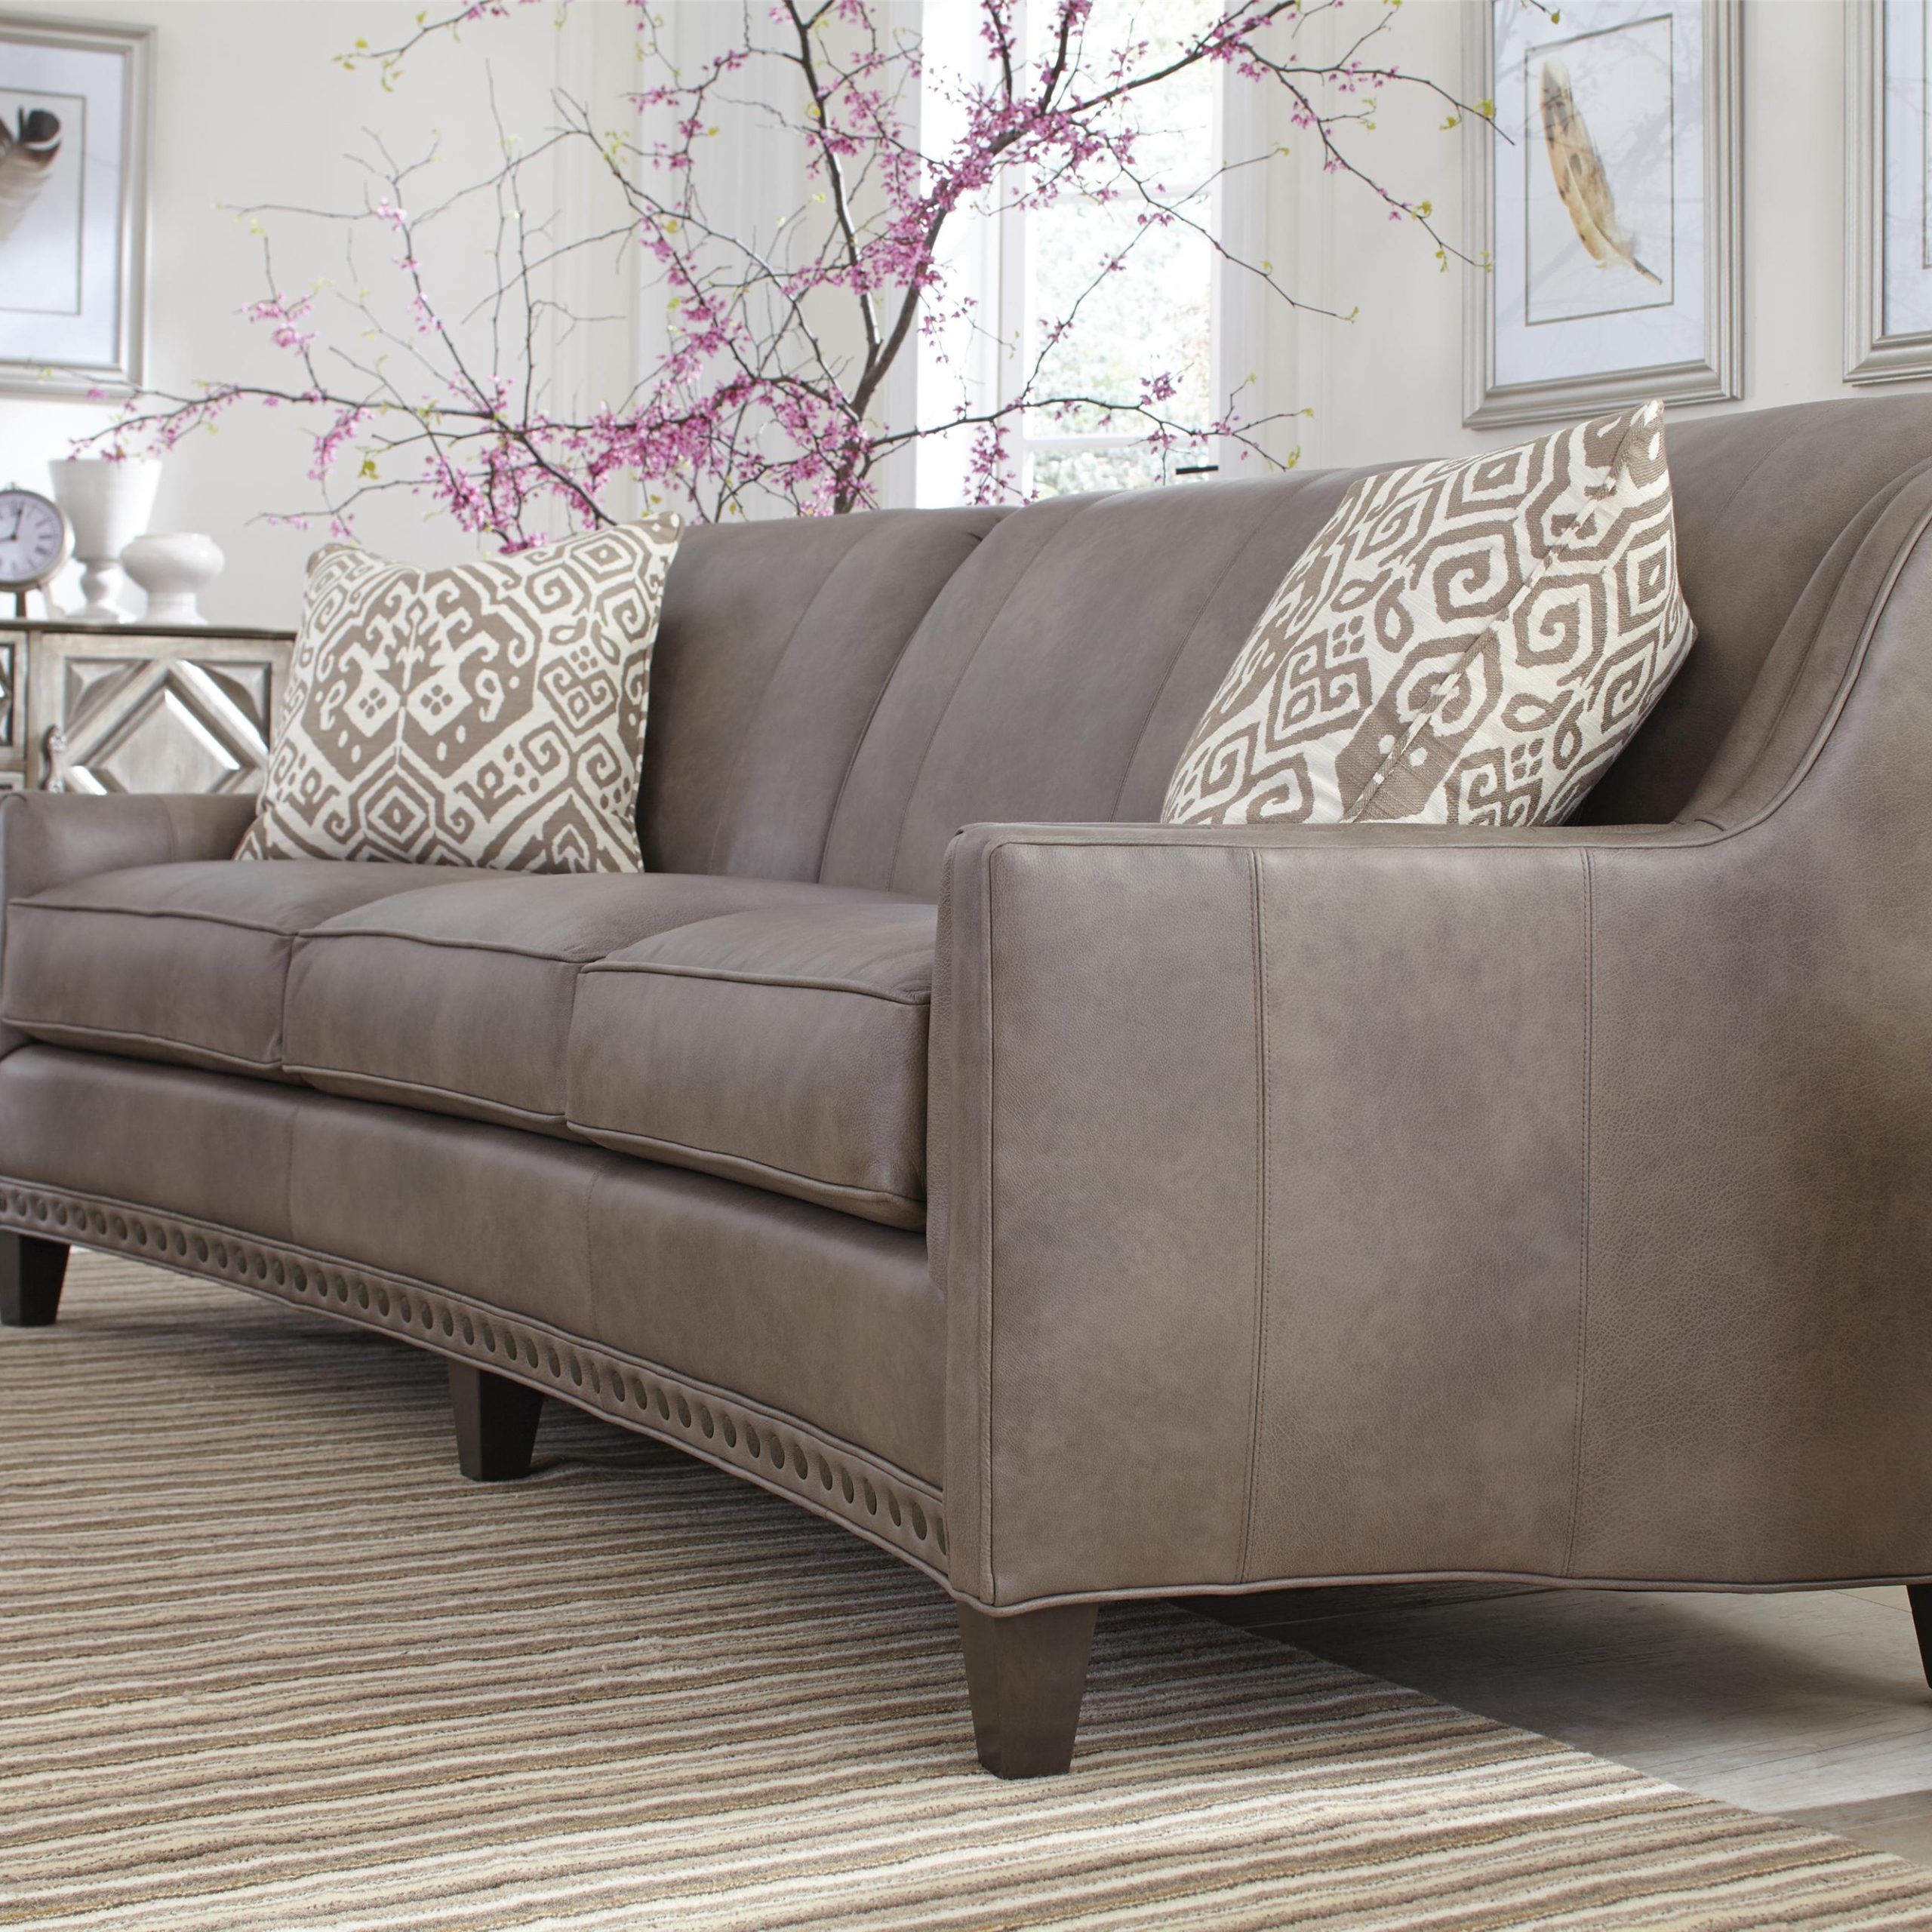 Smith Brothers 227 Slightly Curved Sofa With Sloping Track Arms And With Sofas With Curved Arms (View 13 of 20)